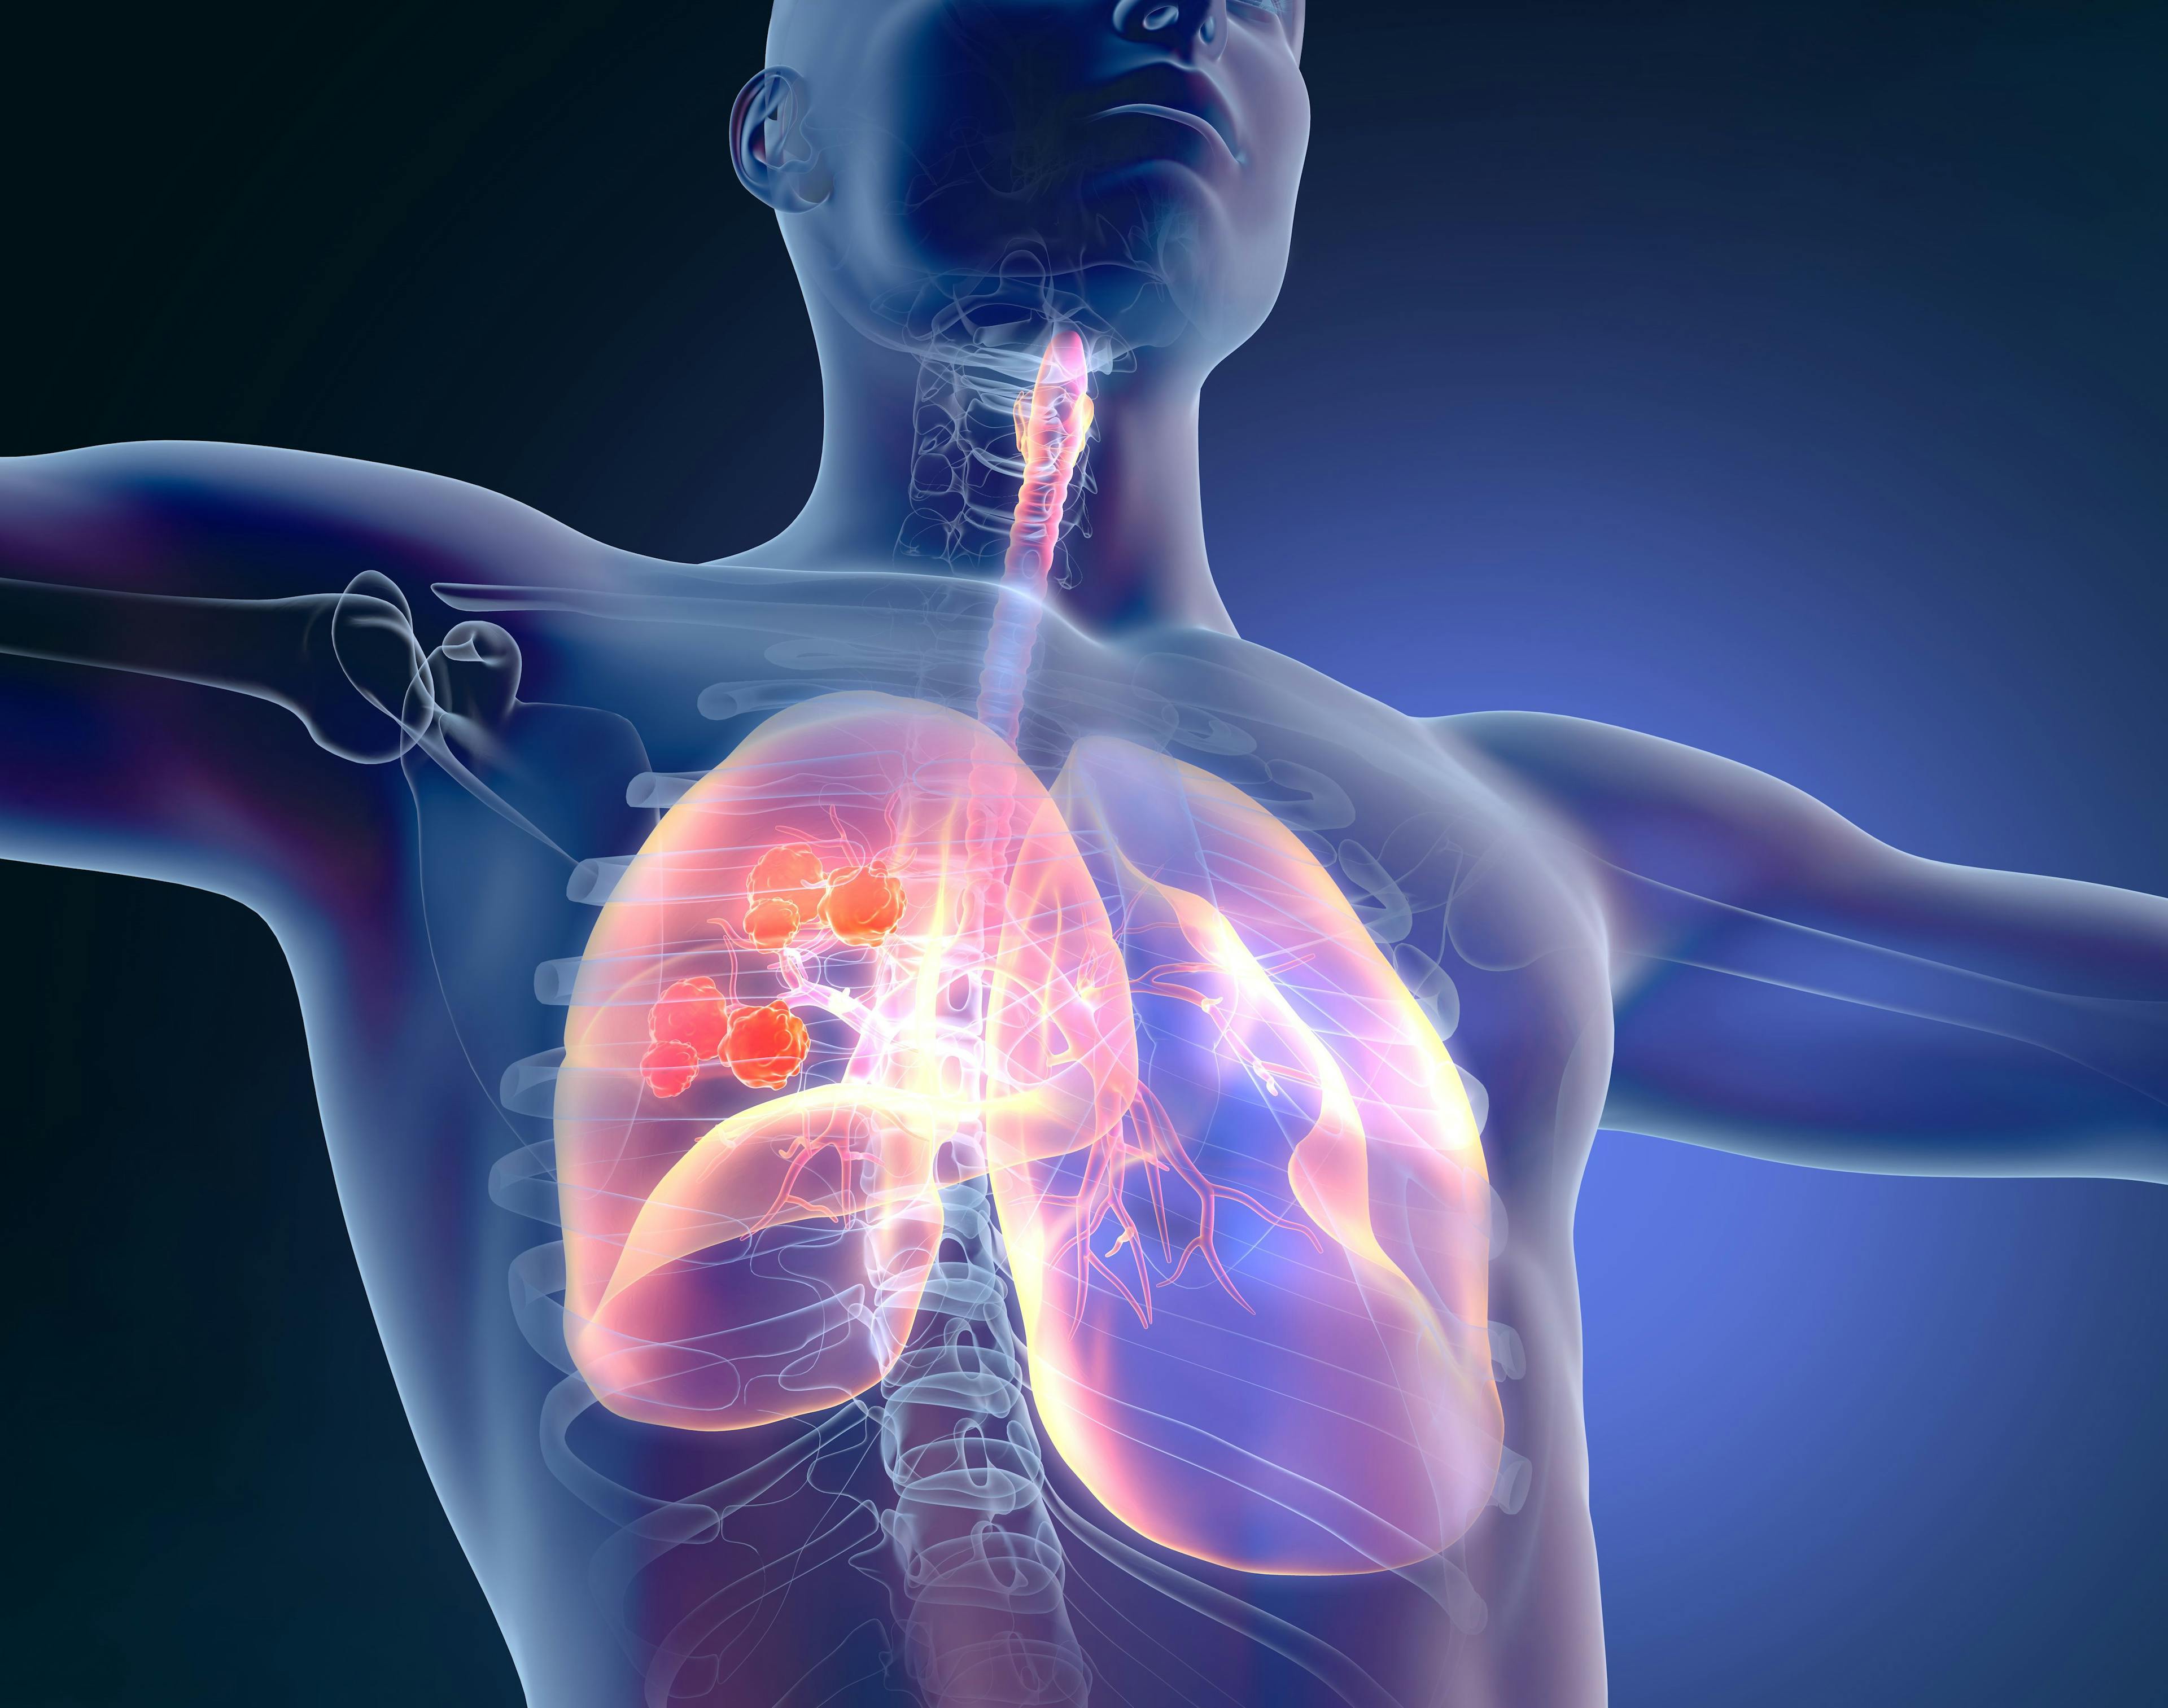 Durable efficacy and a manageable safety profile were observed with selpercatinib for Chinese patients with advanced, RET fusion–positive non–small cell lung cancer.